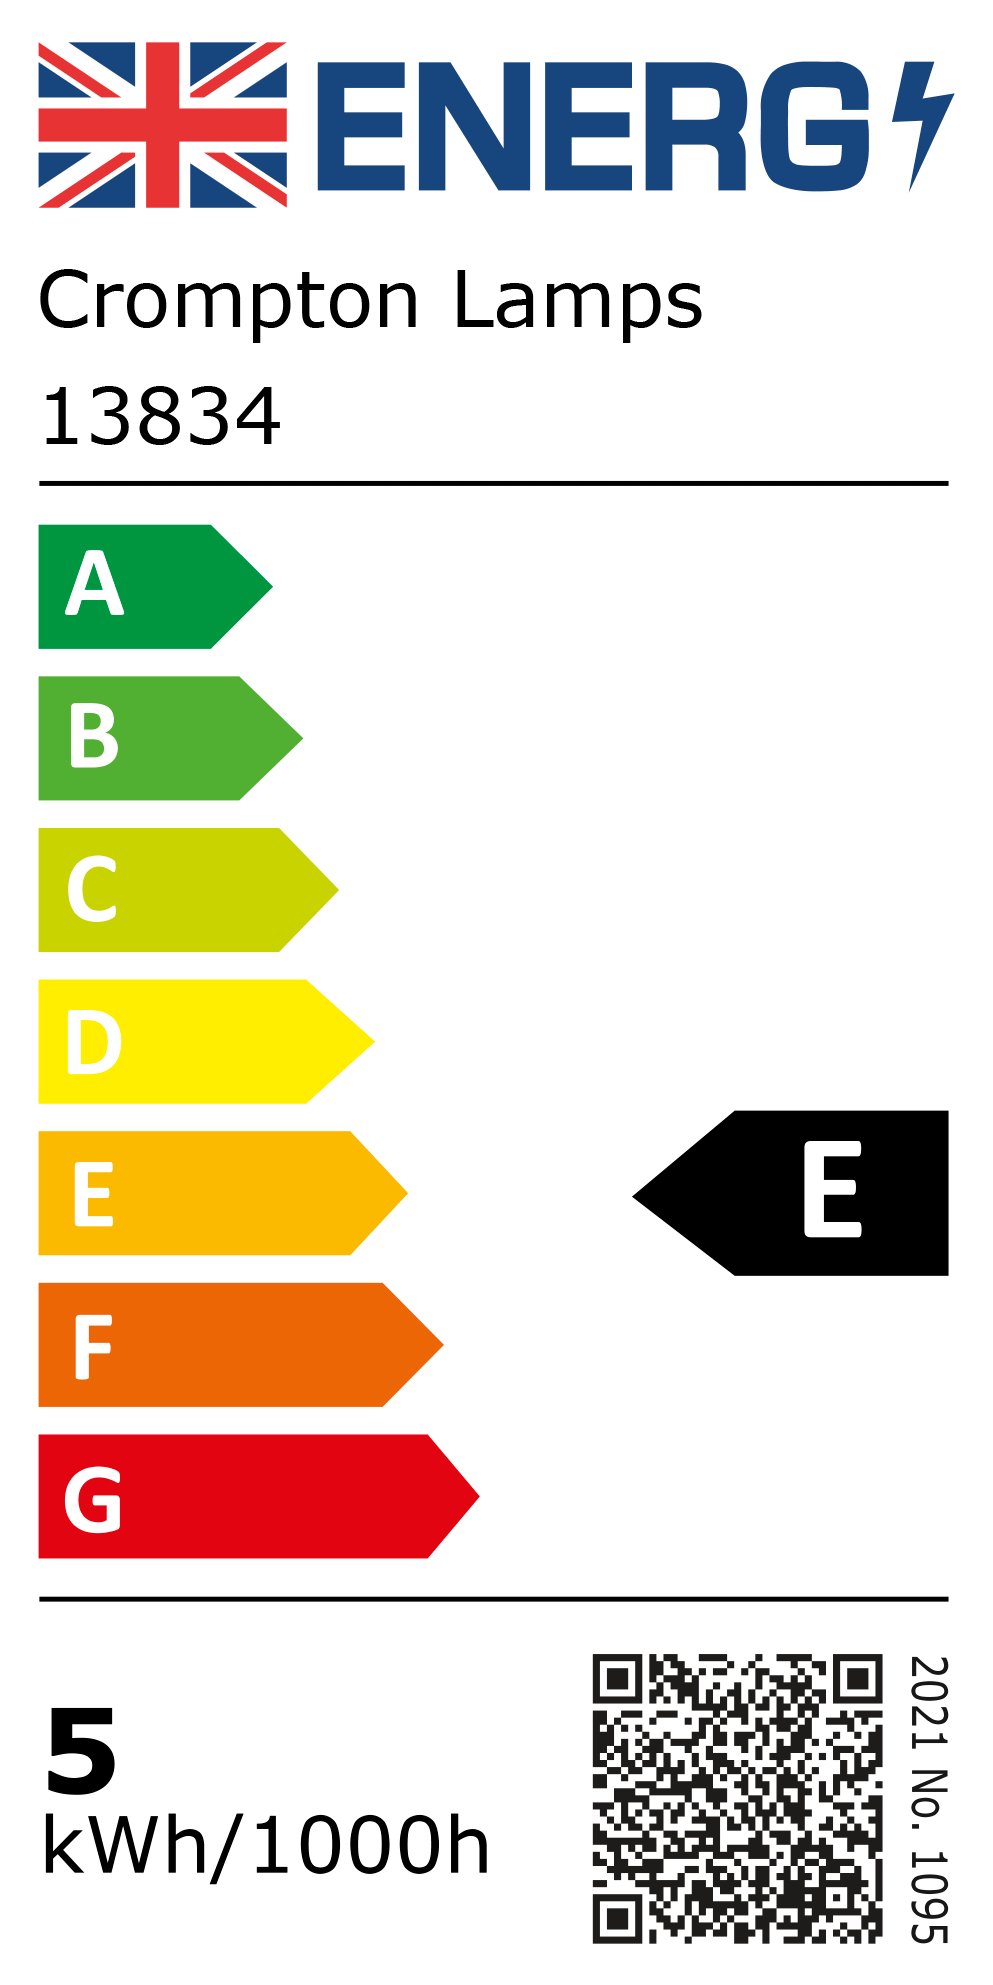 New 2021 Energy Rating Label: Stock Code 13834